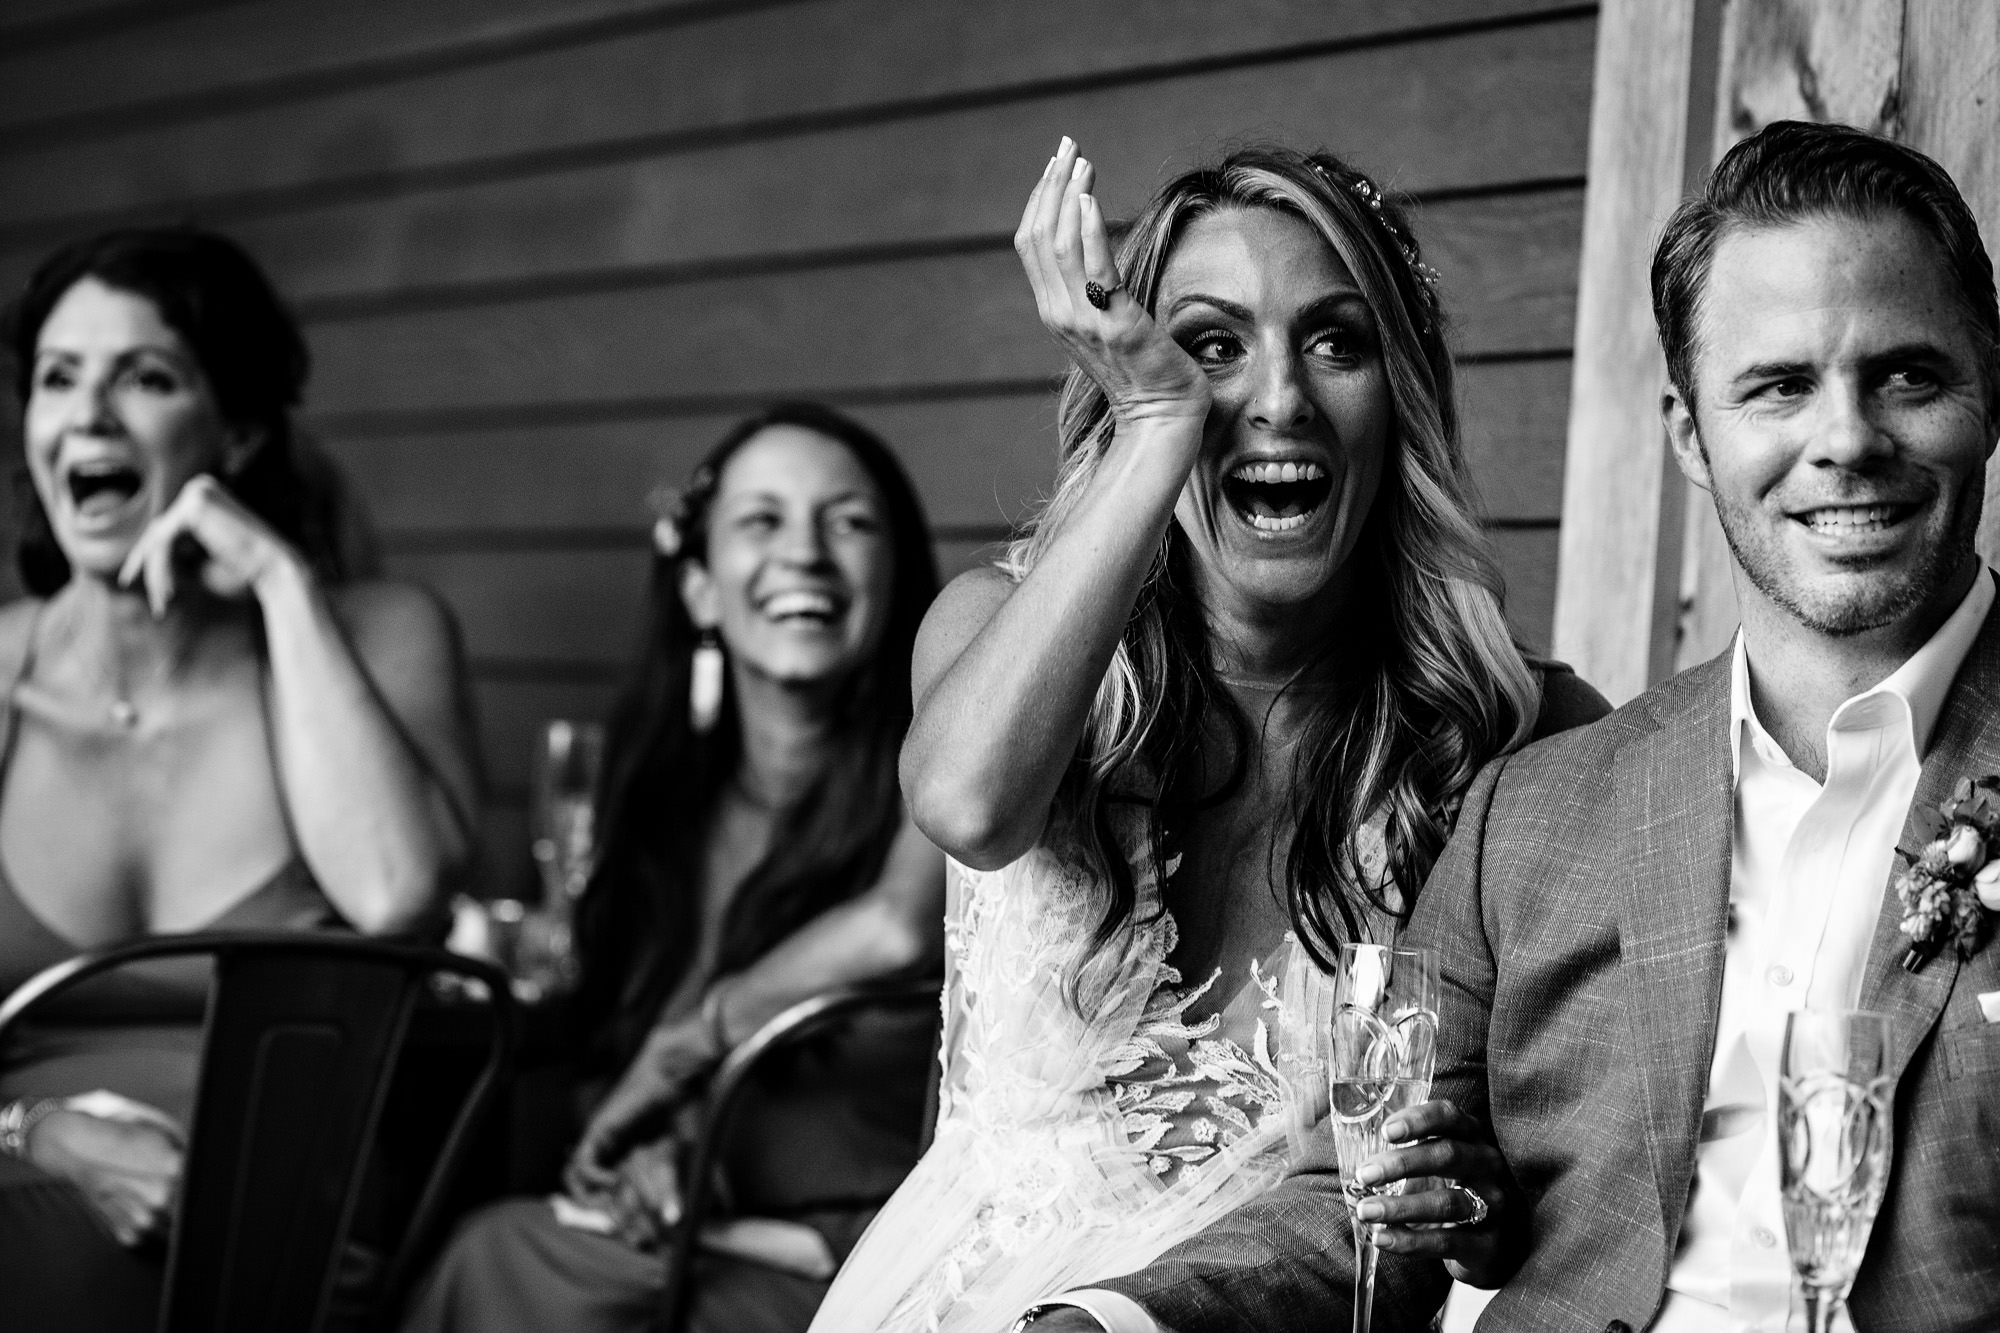 A microwedding reception at Nonesuch River Brewing in Scarborough, Maine